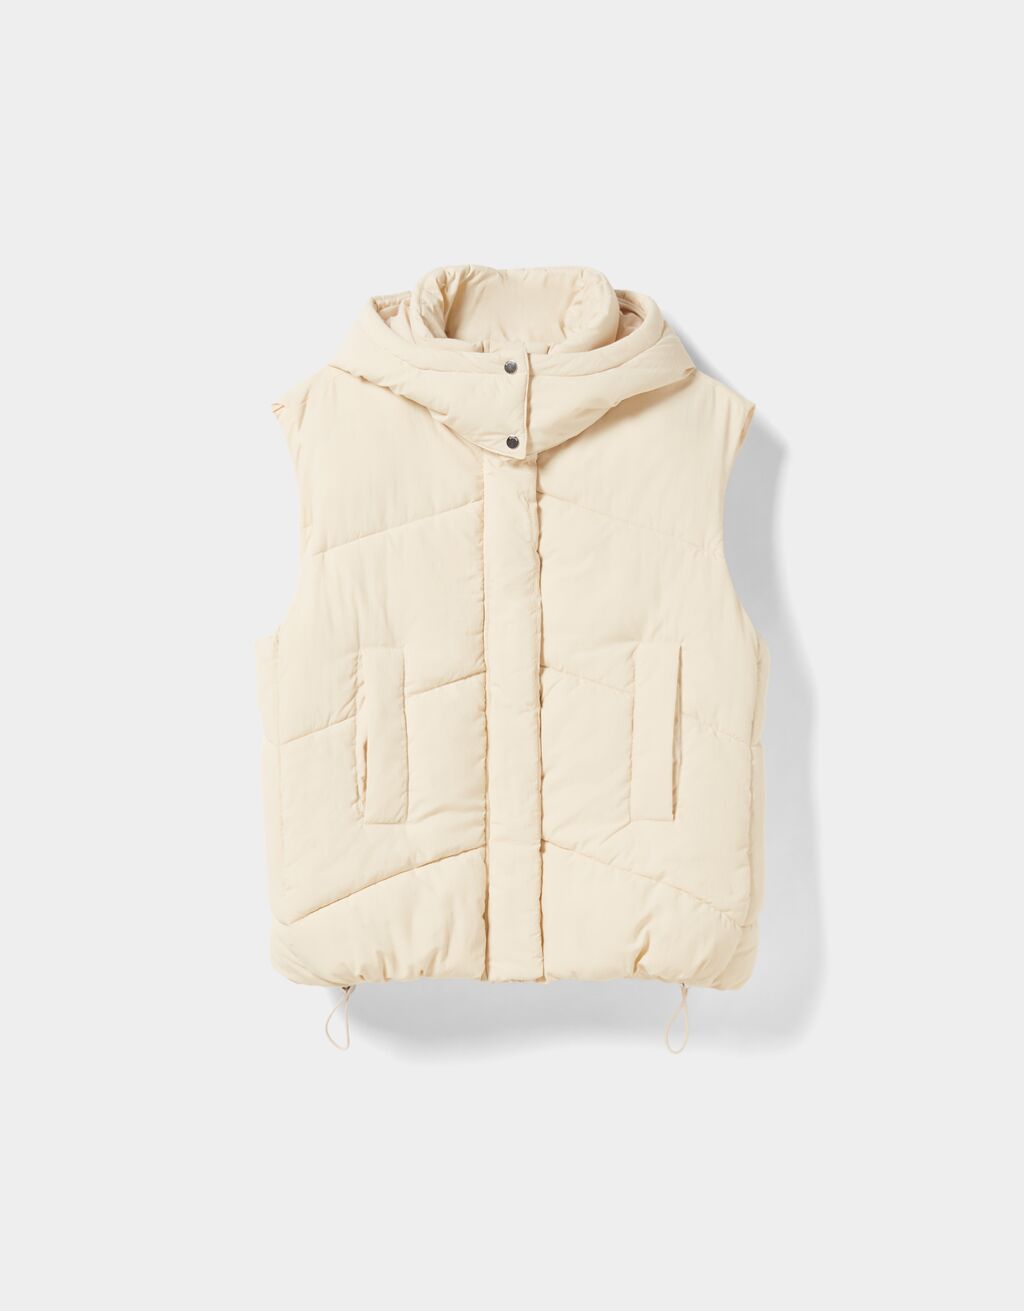 Oversized puffer gilet with hood